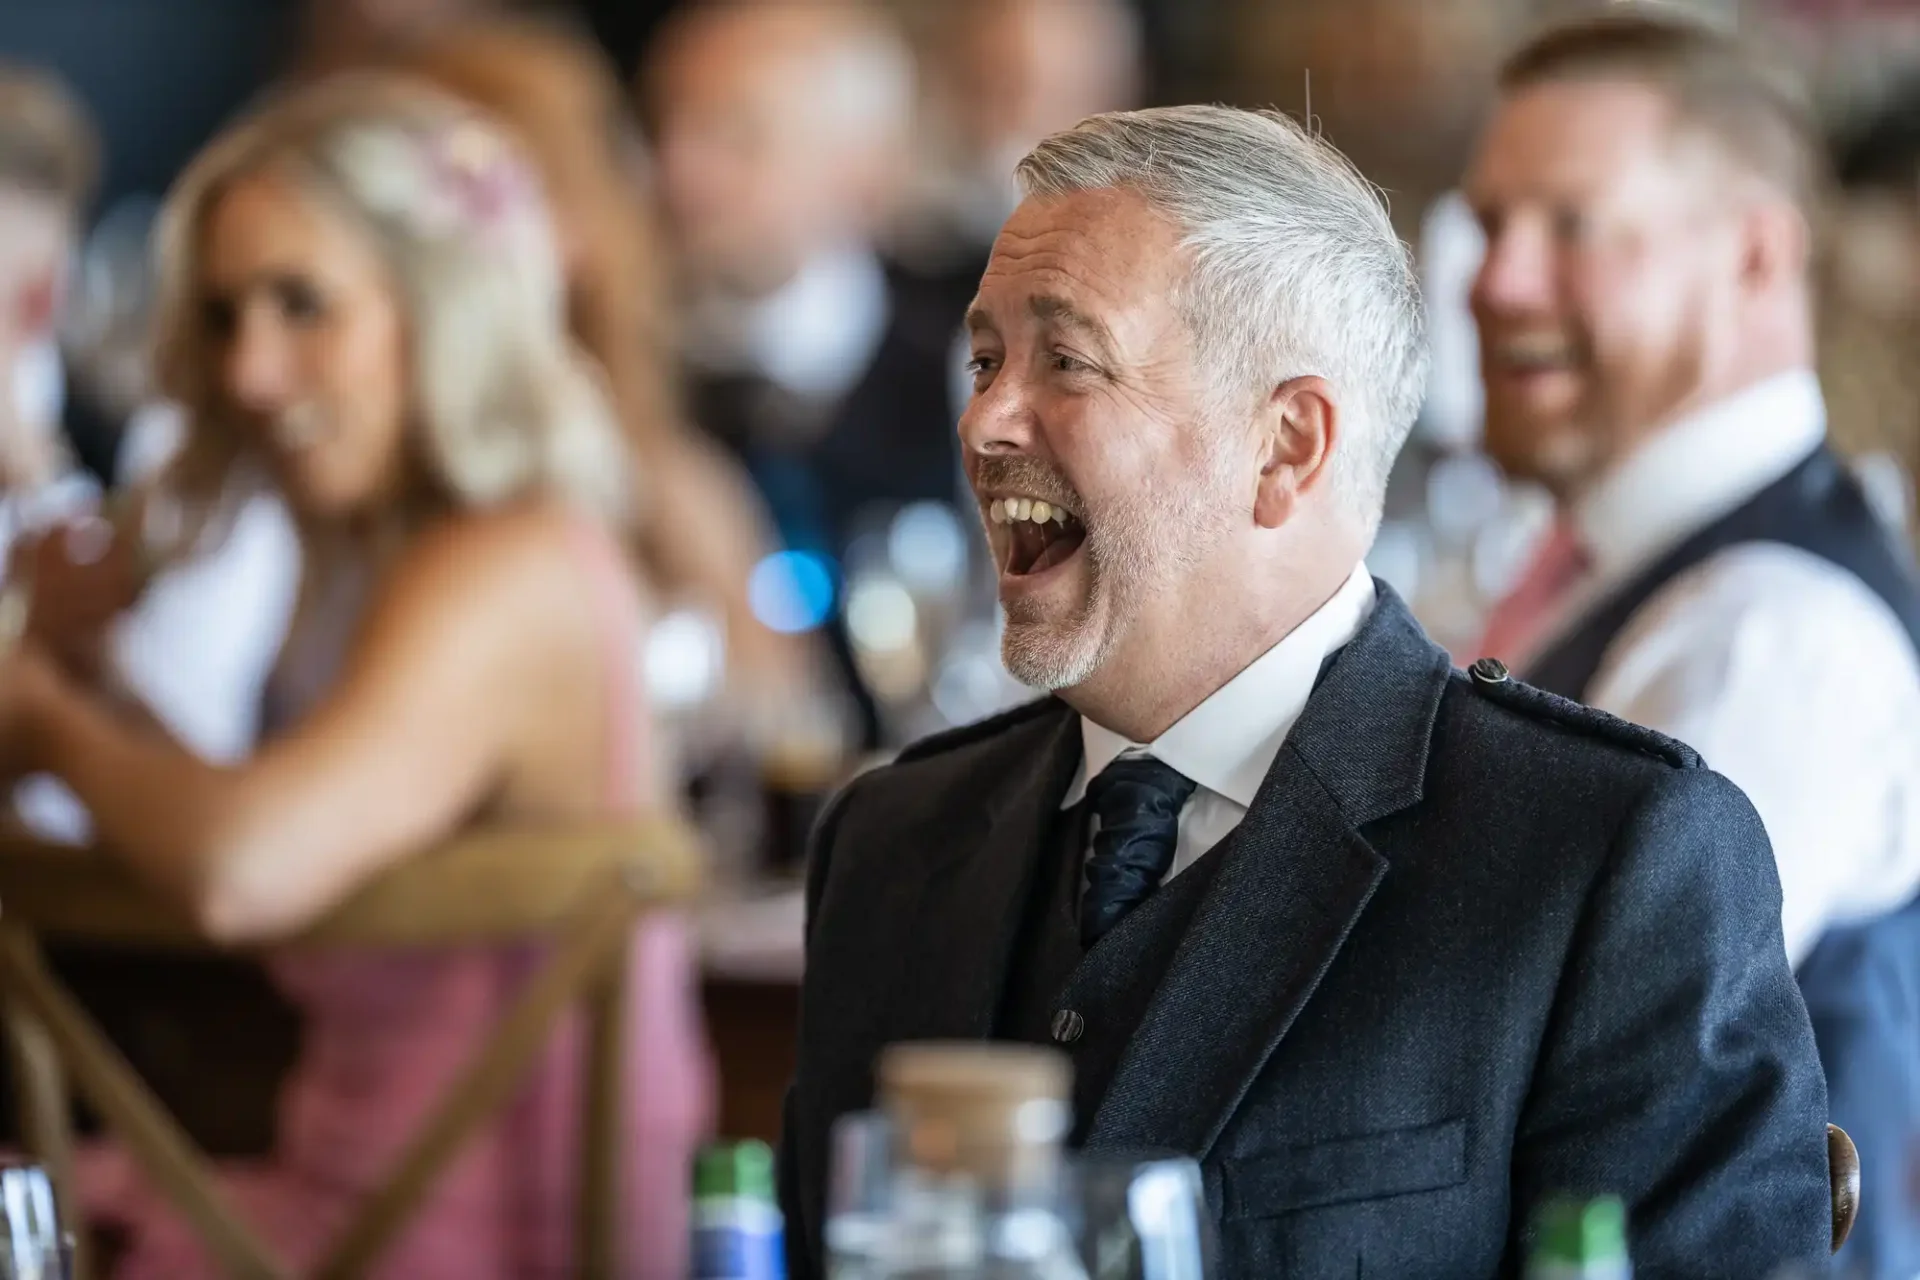 A middle-aged man with gray hair, wearing a suit and tie, laughing joyously at a social event with people in background.